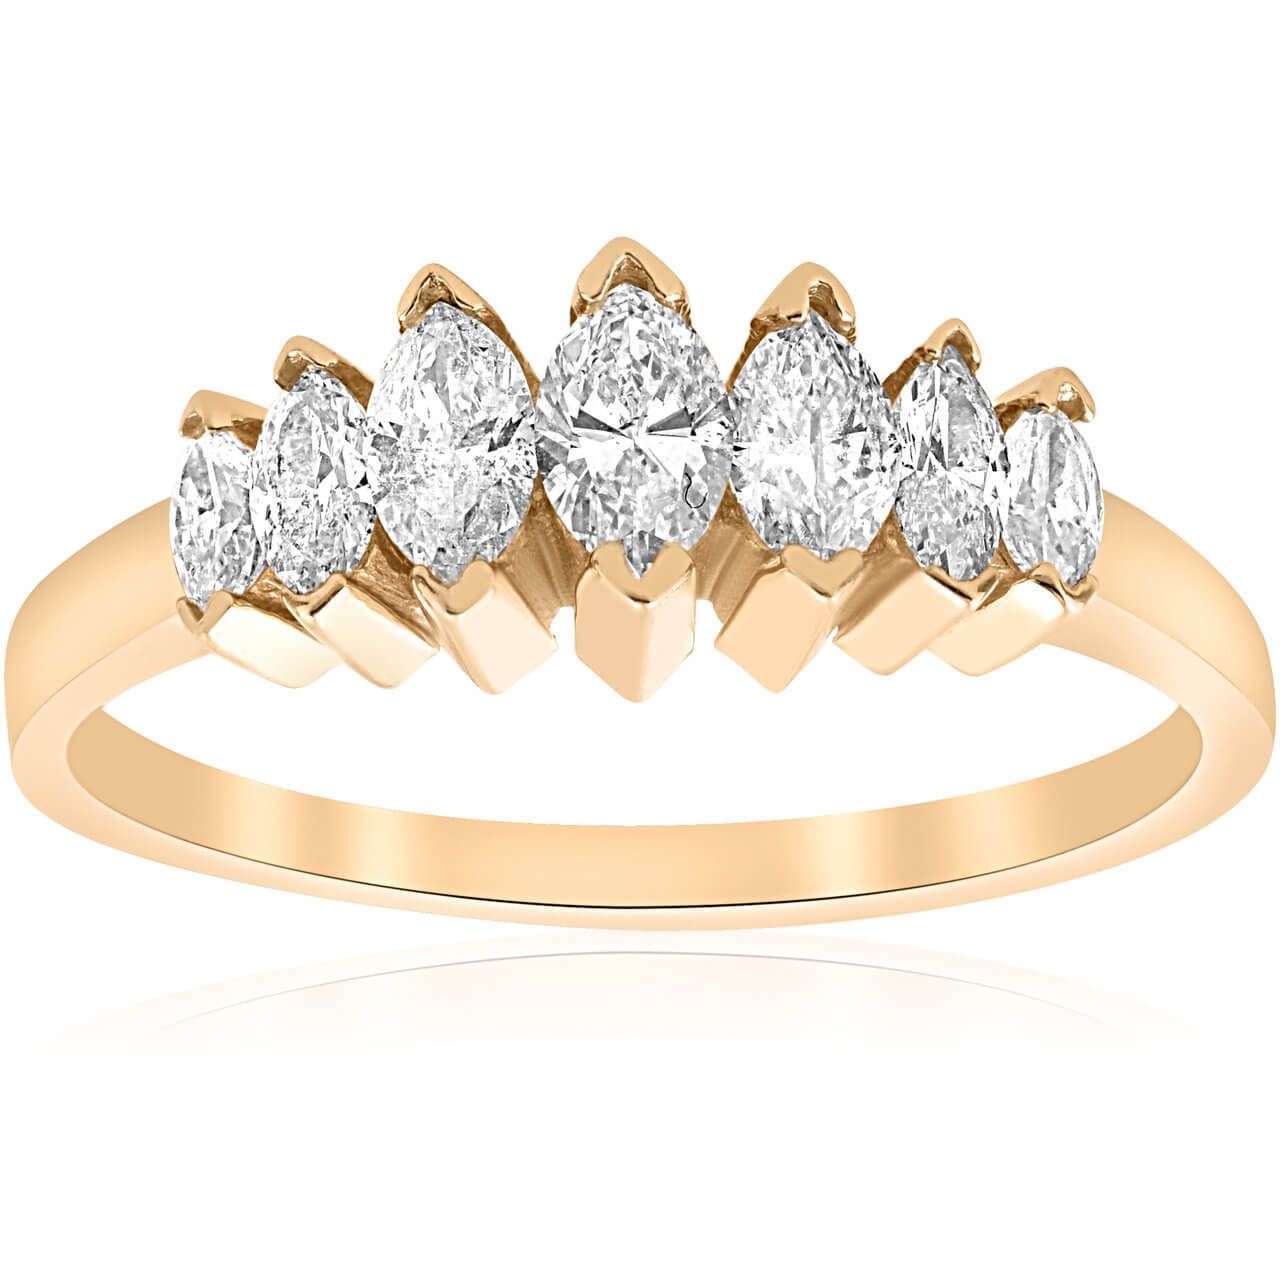 Yellow Gold Marquise Diamond Wedding Anniversary Ring Band Throughout Best And Newest Diamond Eternity Anniversary Bands In White Gold (View 24 of 25)